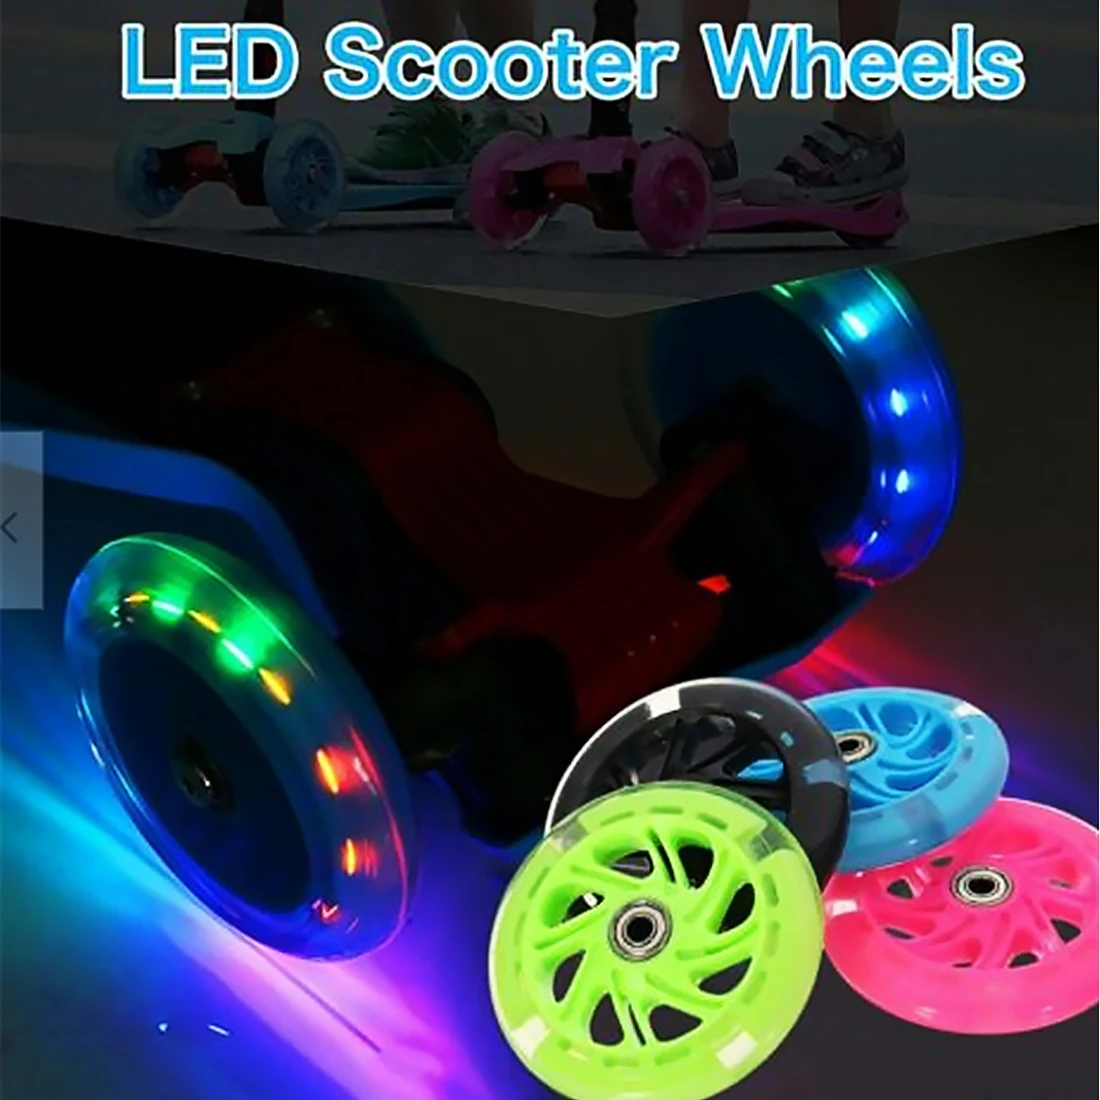 New 80-120mm LED Flash Light Wheel for Mini Maxi Micro Scooter ABED-7 F7 